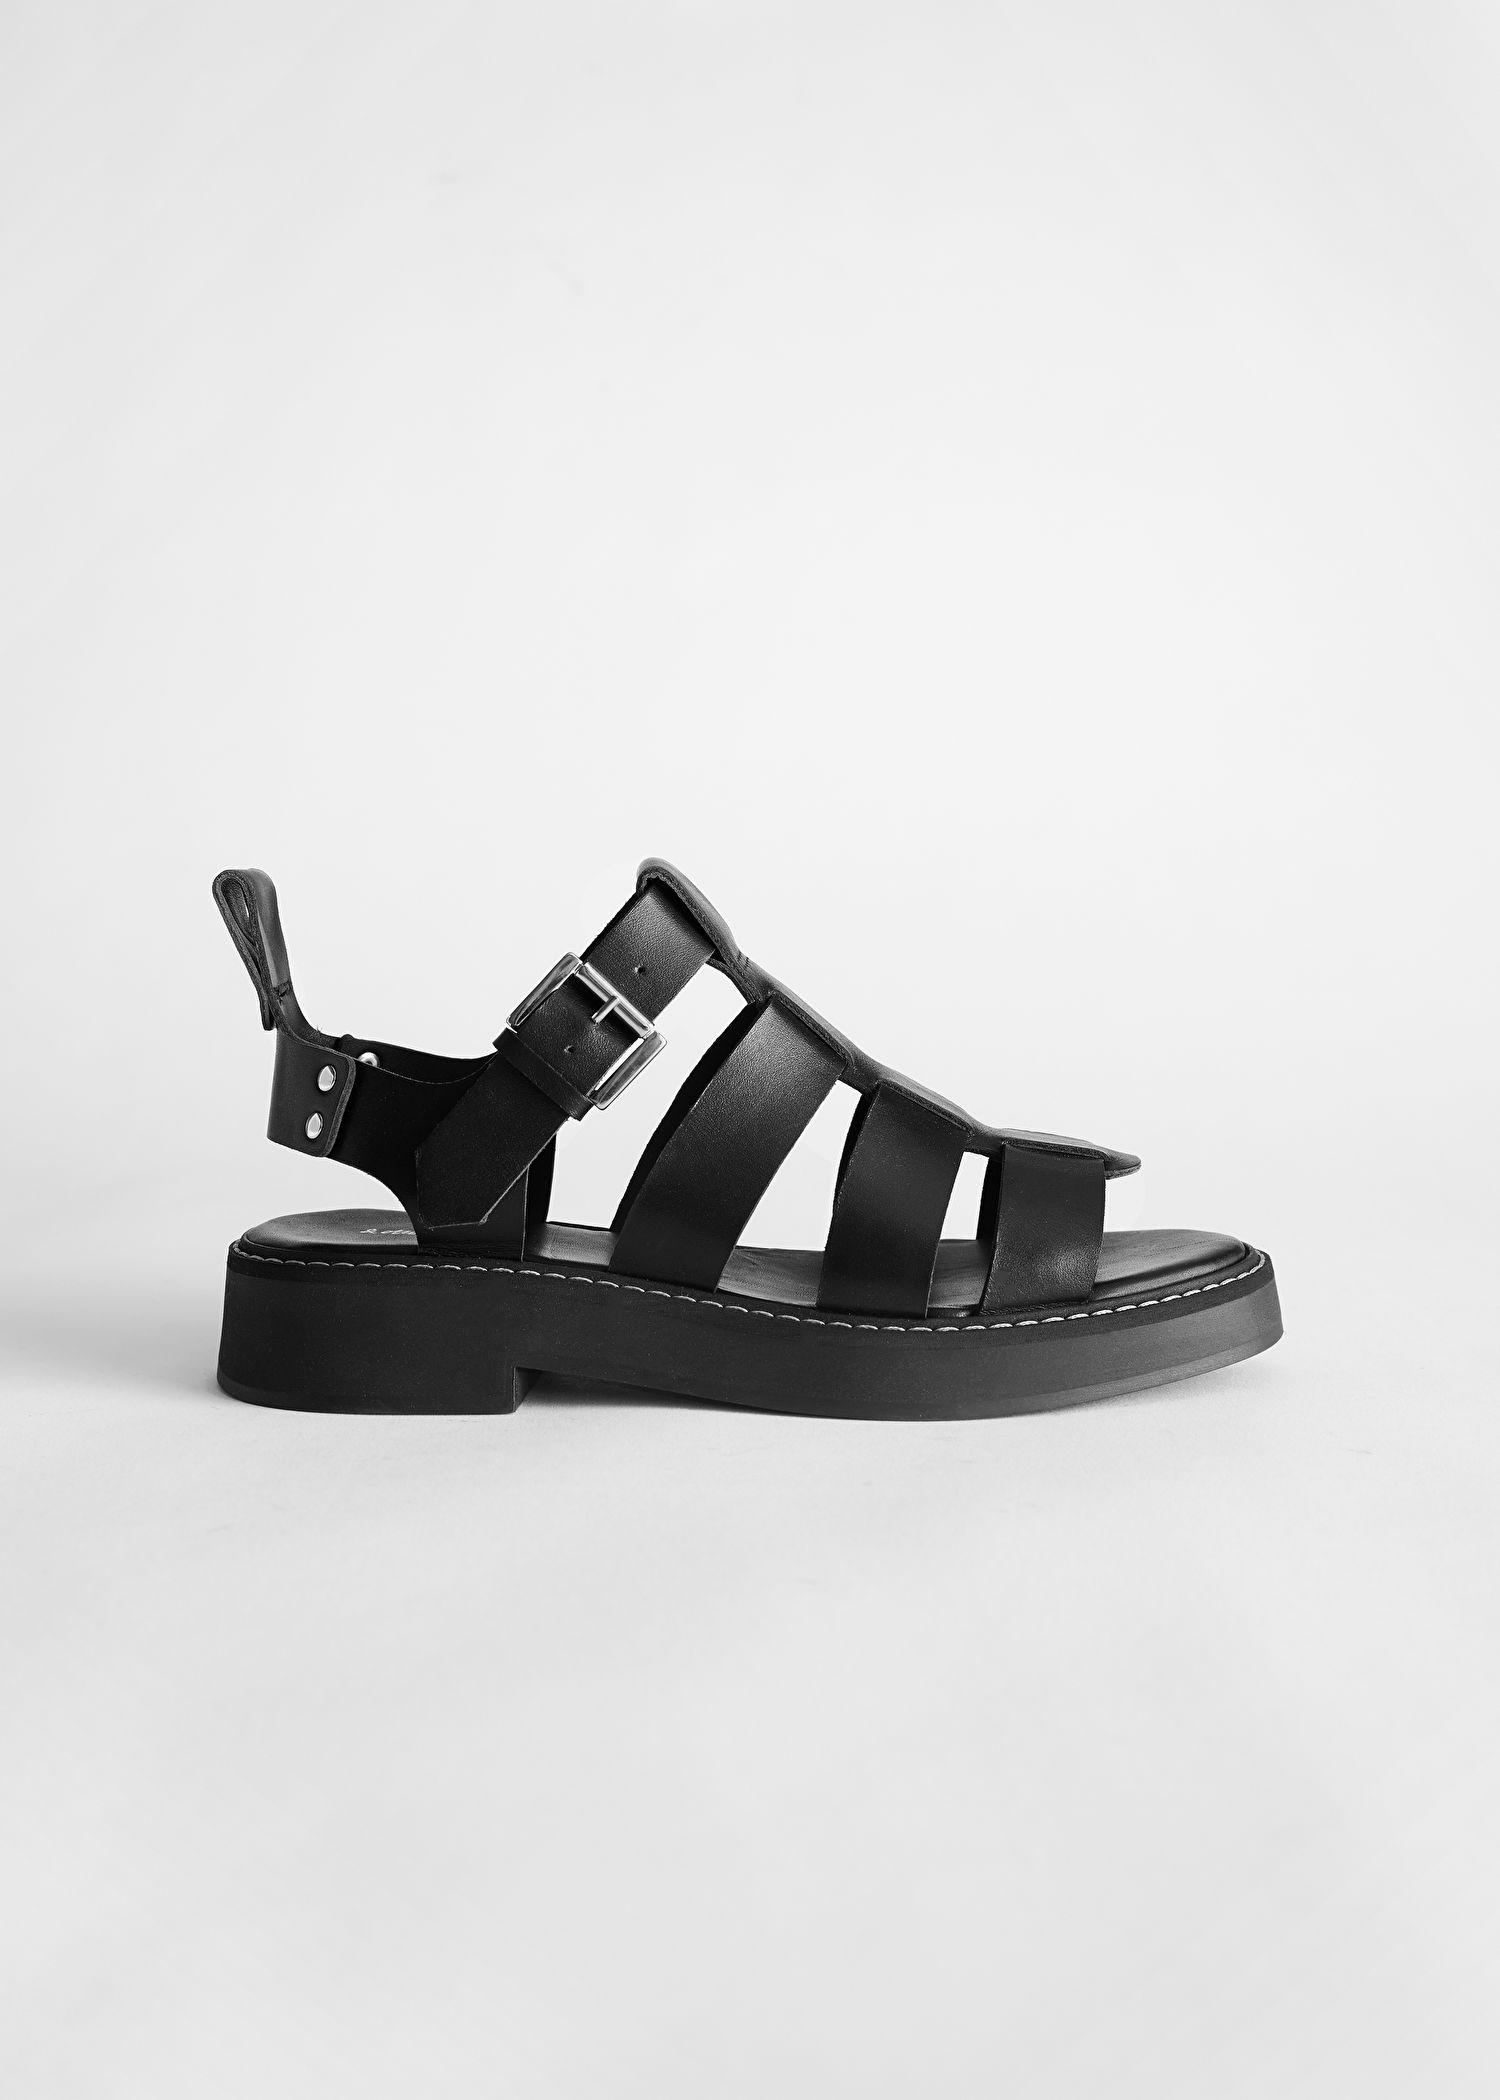 & Other Stories Chunky Leather Gladiator Sandals in Black | Lyst Australia